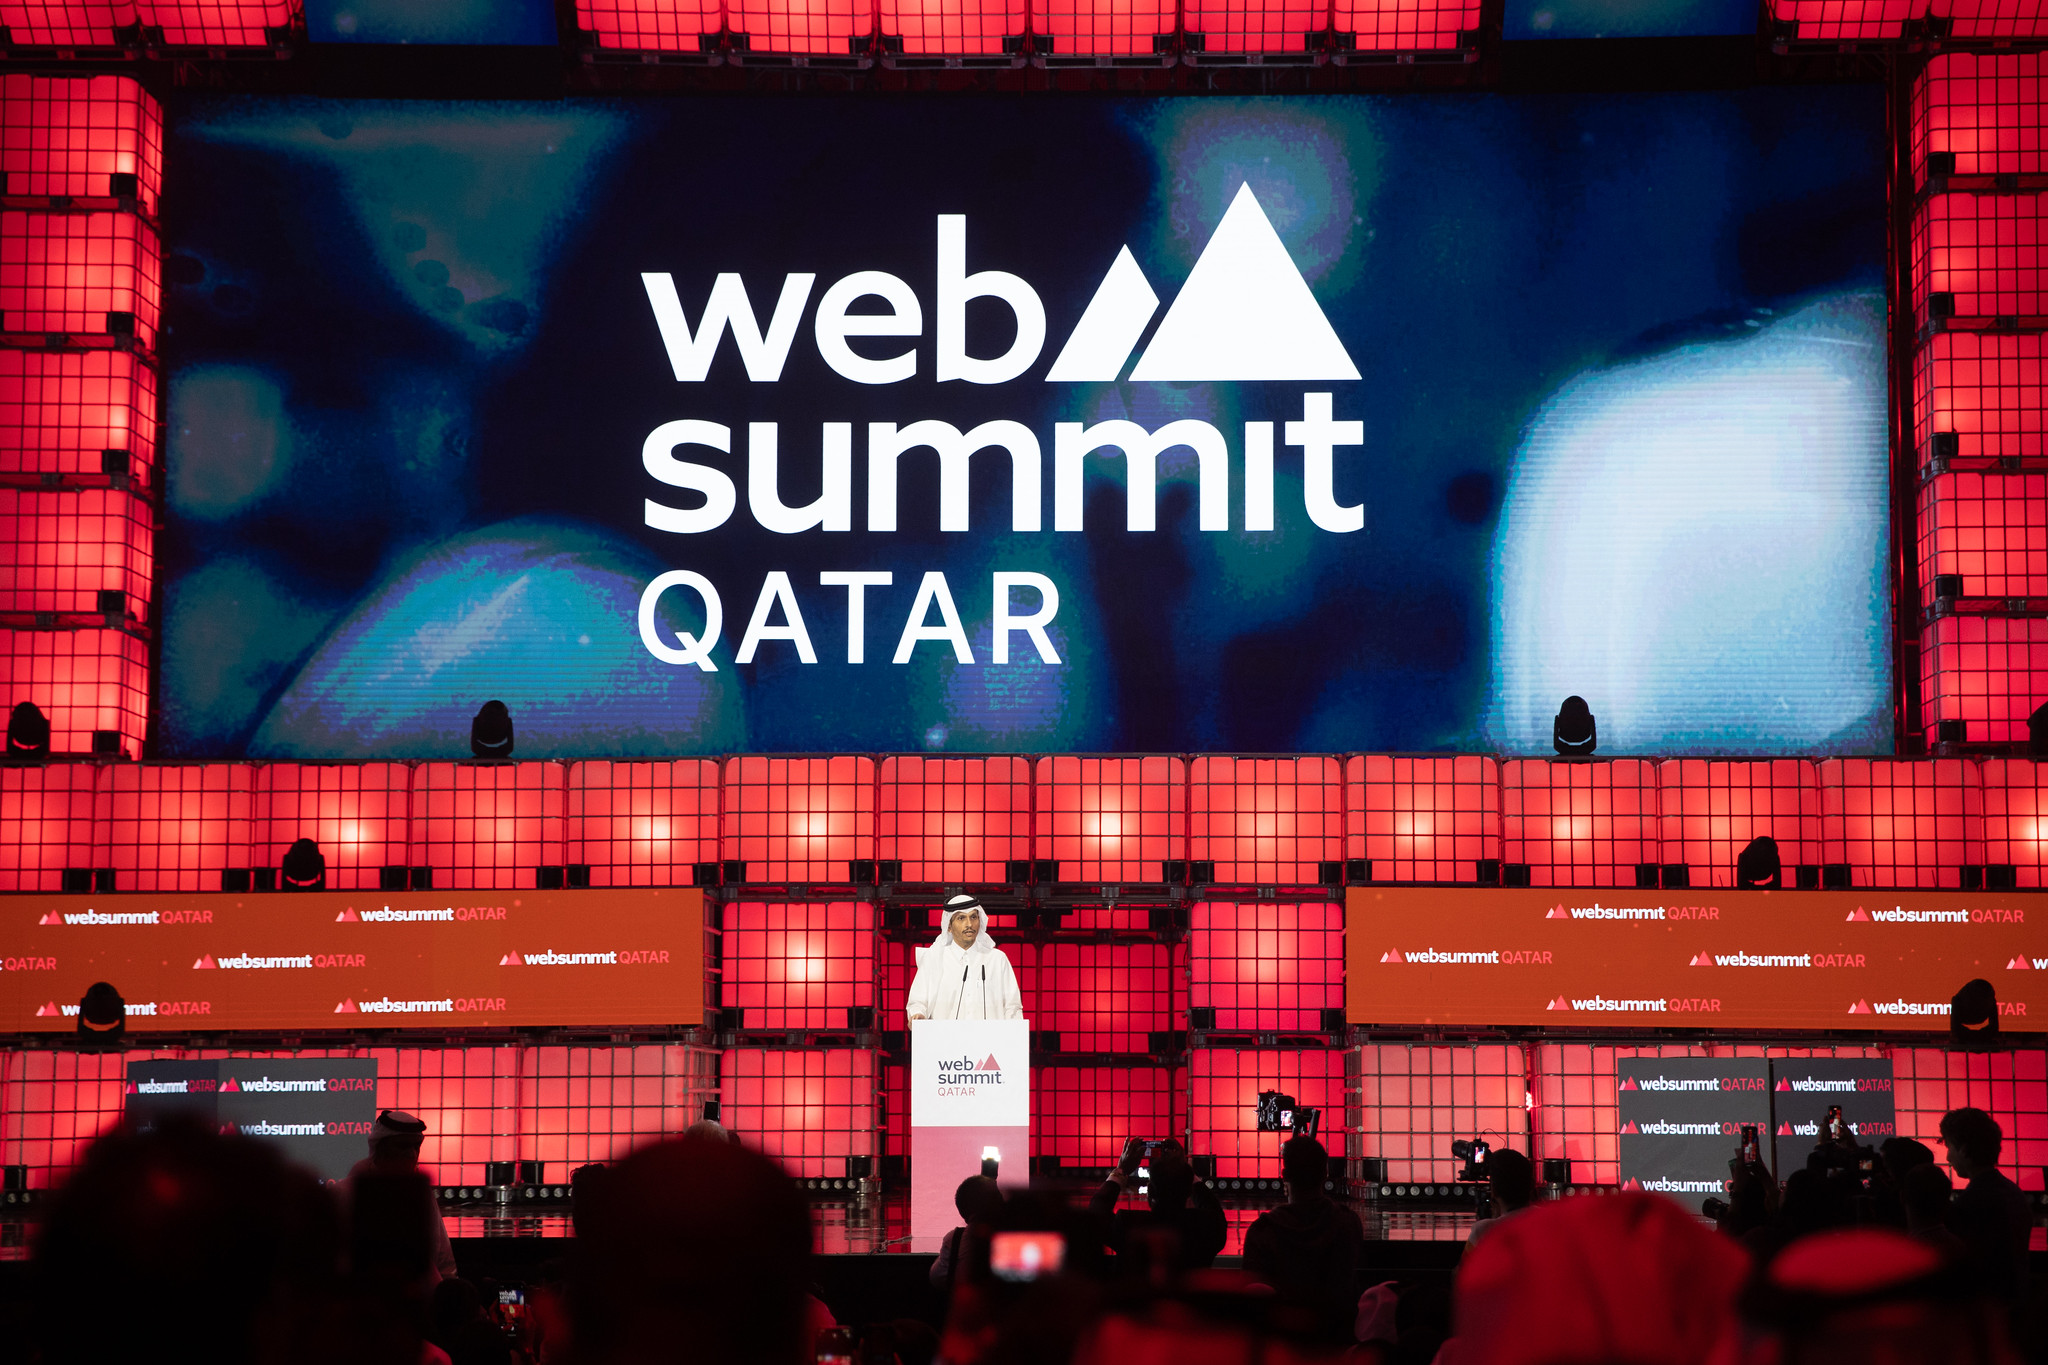 A large stage viewed over the heads of a packed audience. The Web Summit Qatar logo is visible on a large screen that dominates the back wall of the stage. In the centre of the stage stands His Excellency Sheikh Mohammed bin Abdulrahman Al Thani, the State of Qatar's prime minister and minister of foreign affairs